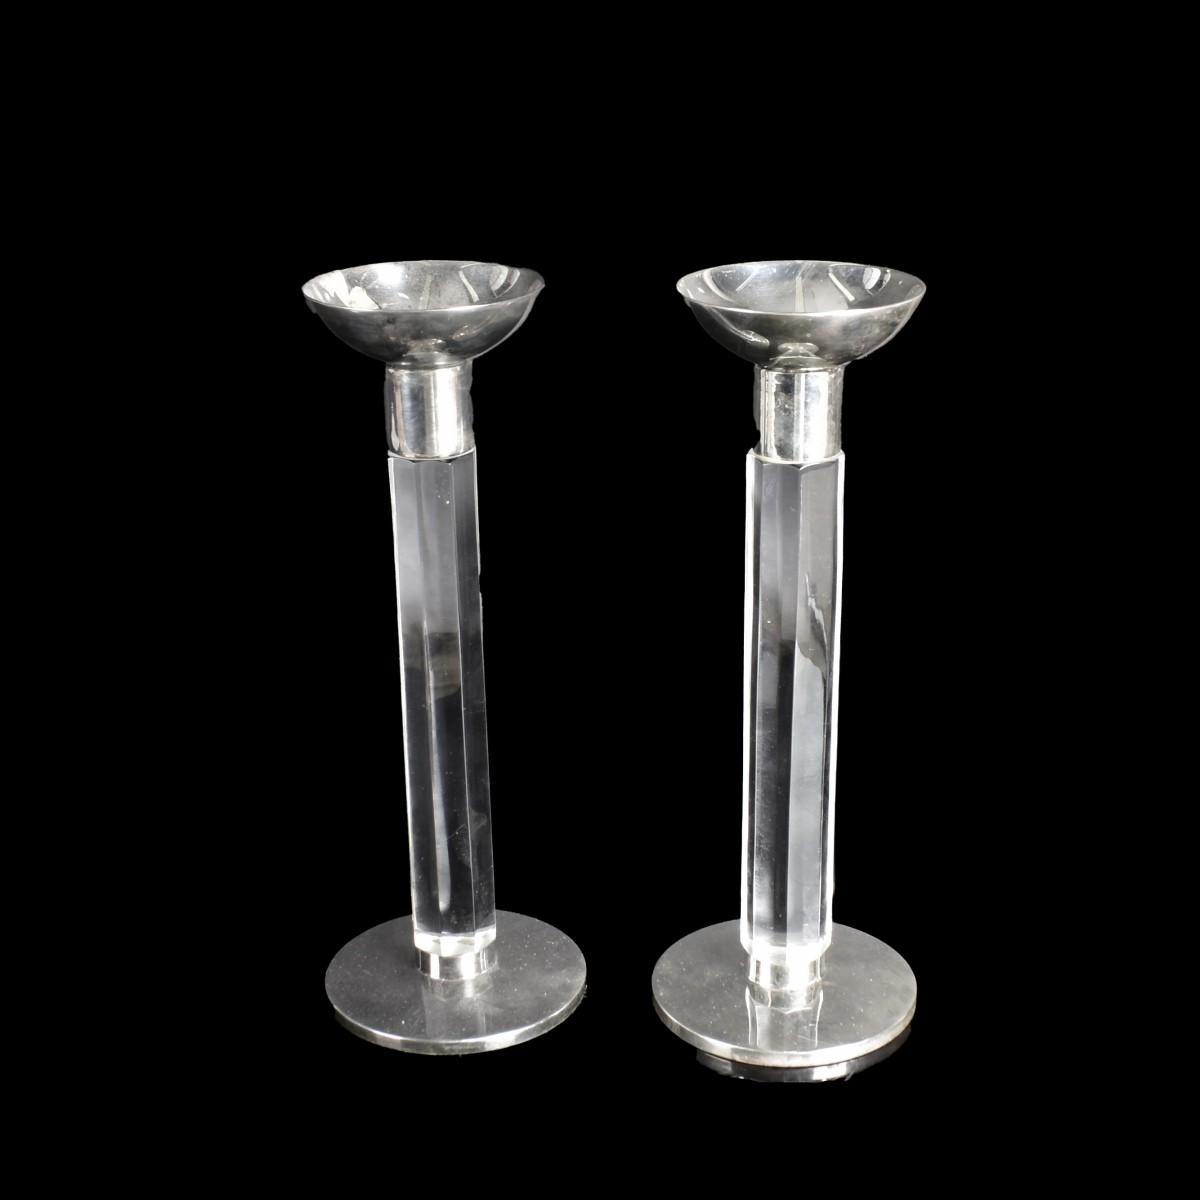 Two Pairs of Candlesticks